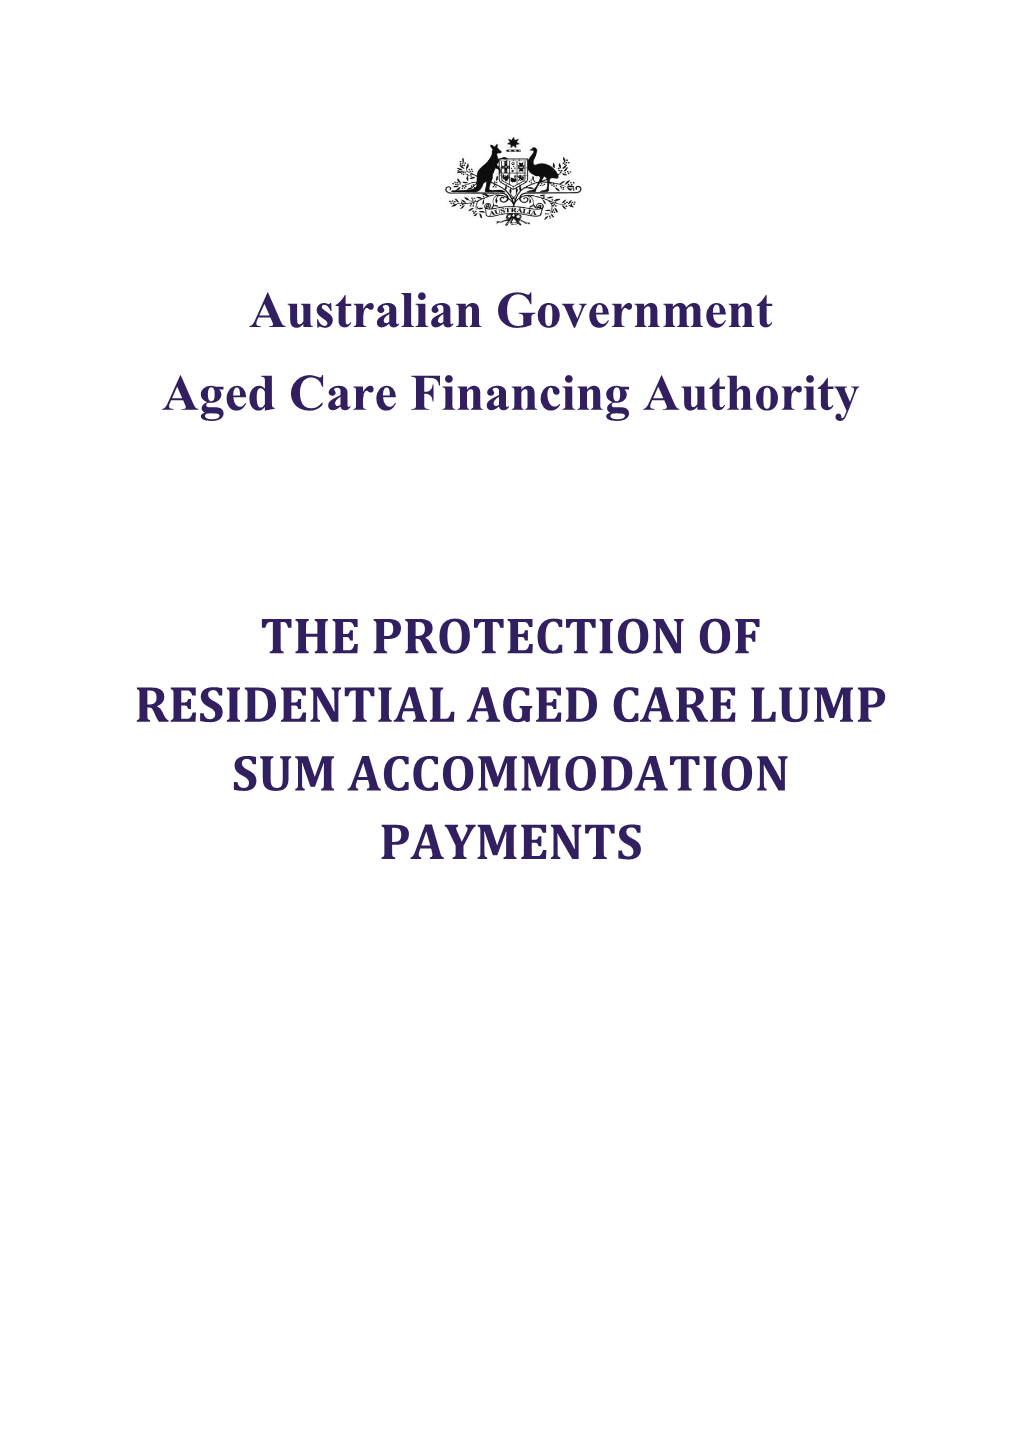 The Protection of Residential Aged Care Accommodation Lump Sum Accommodation Payments